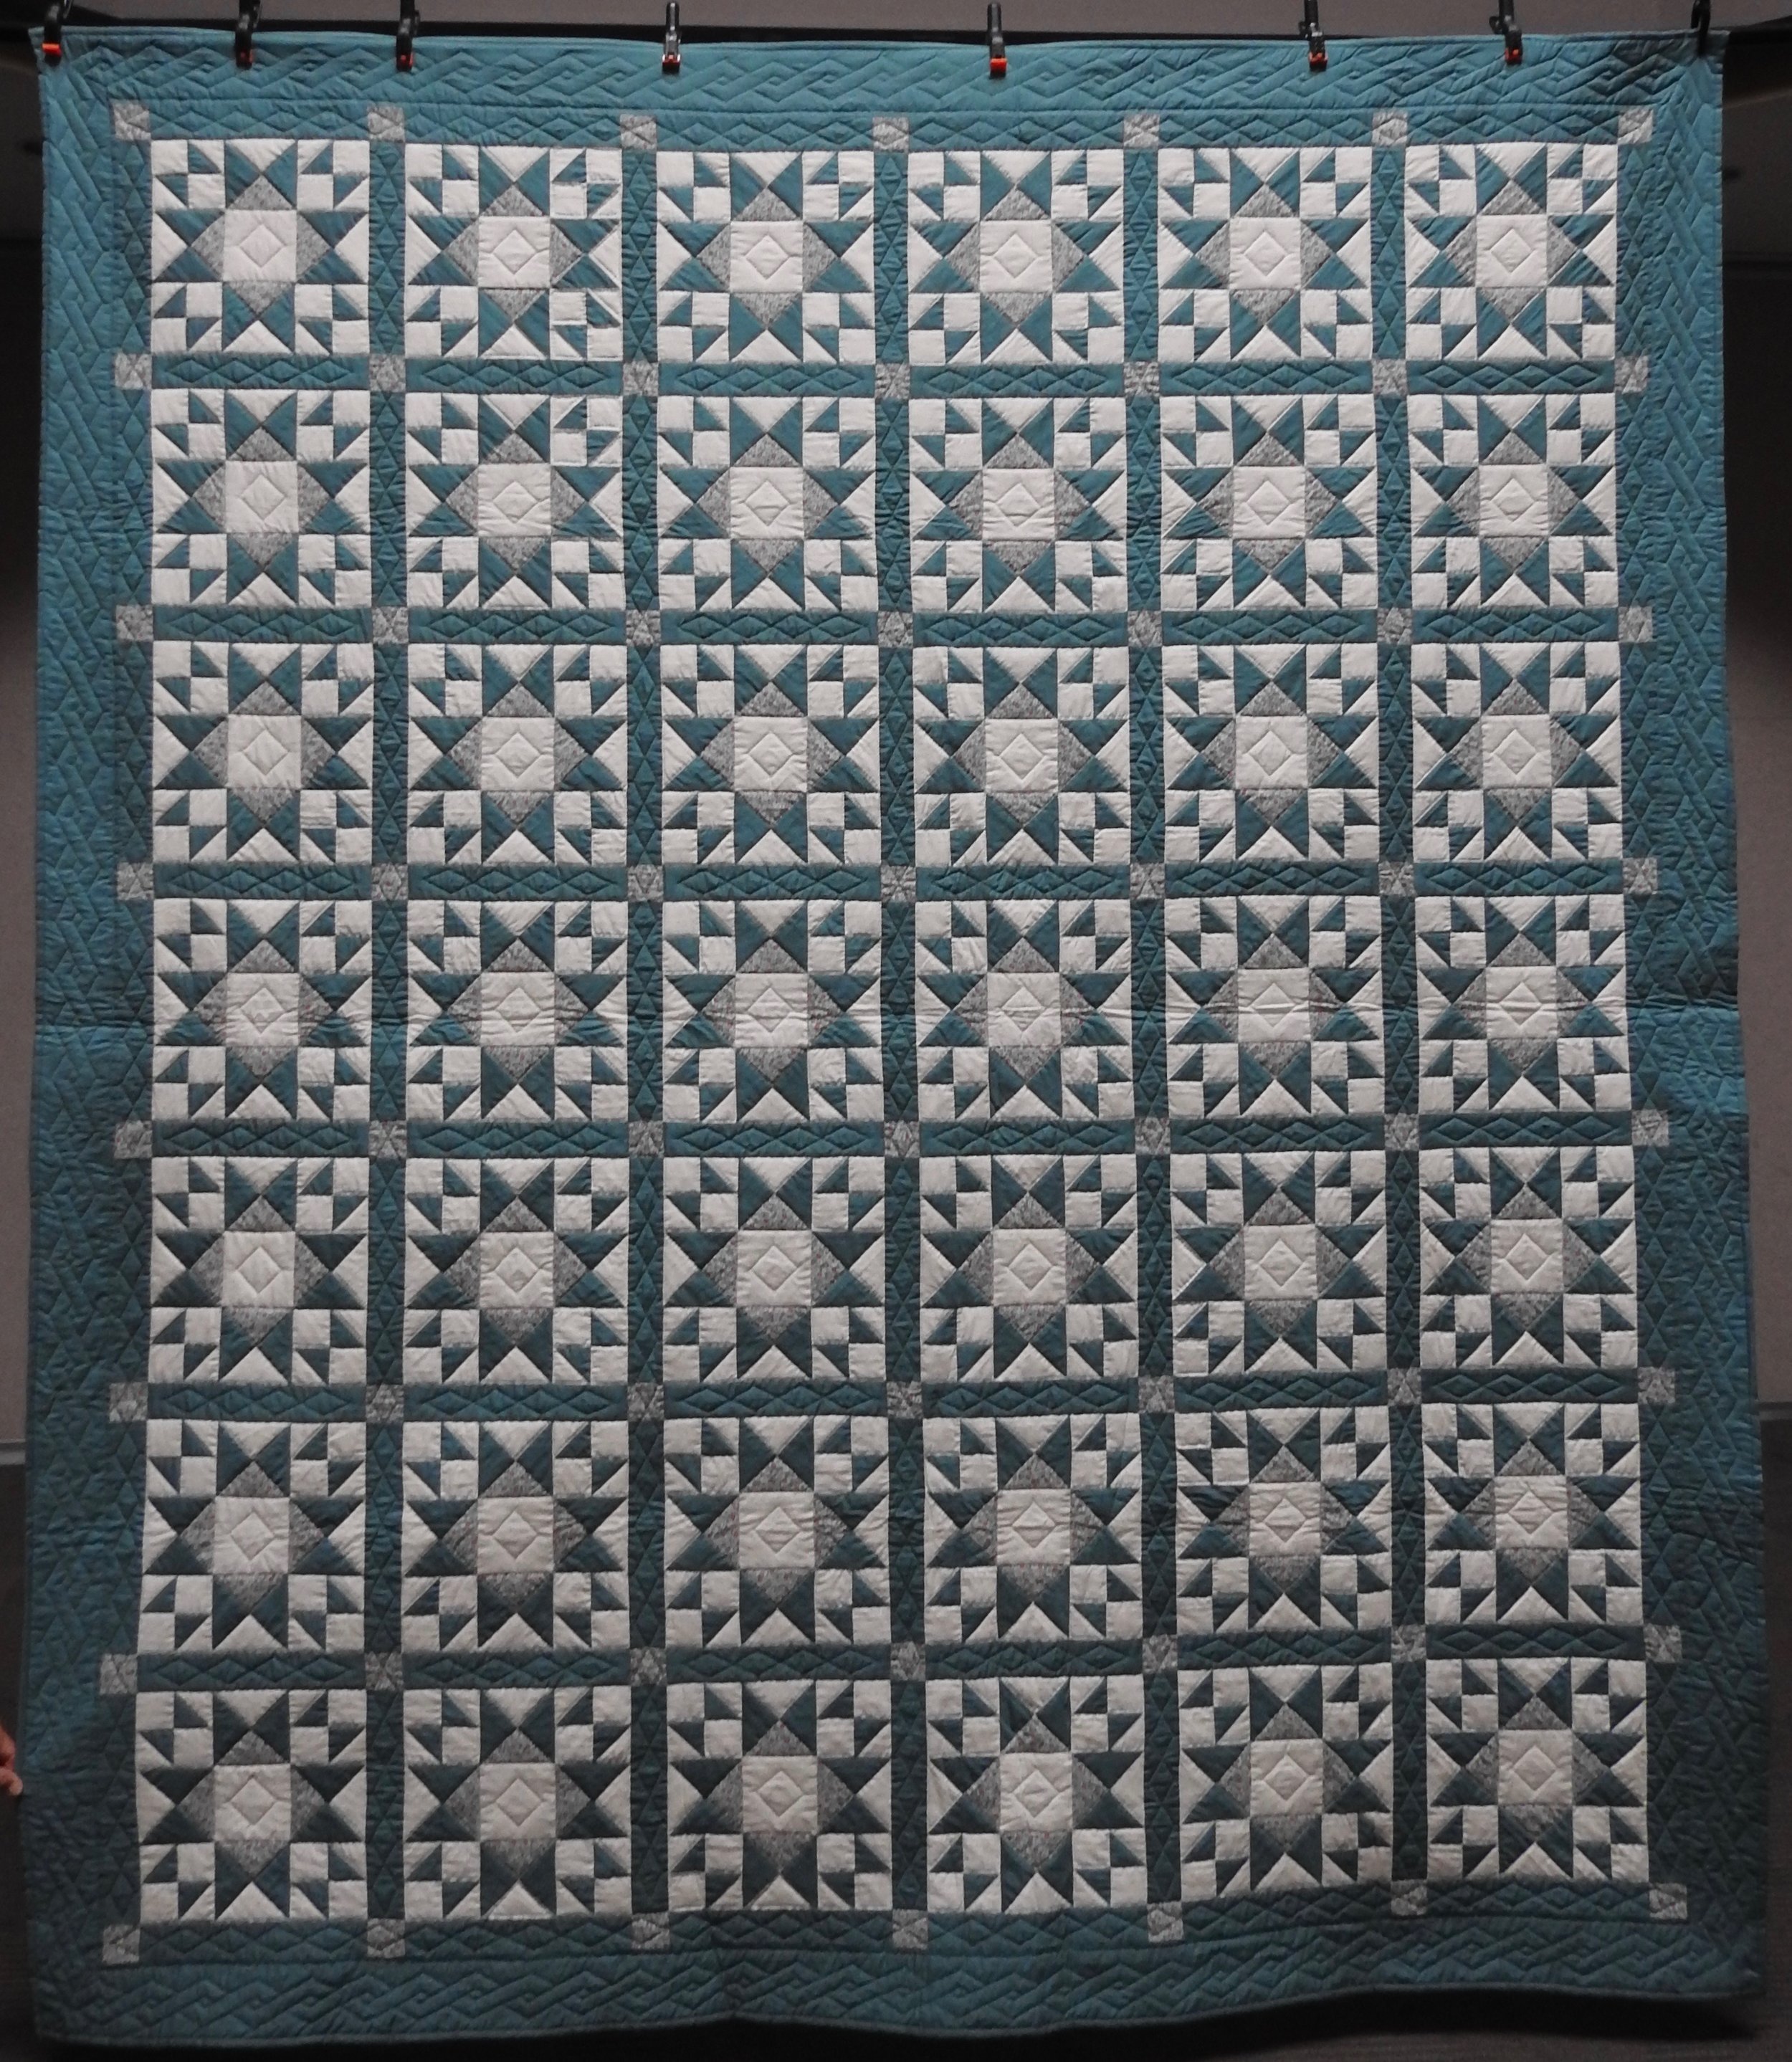 Ohio Star Variation, Pieced, Hand Quilted, 93 x 106”